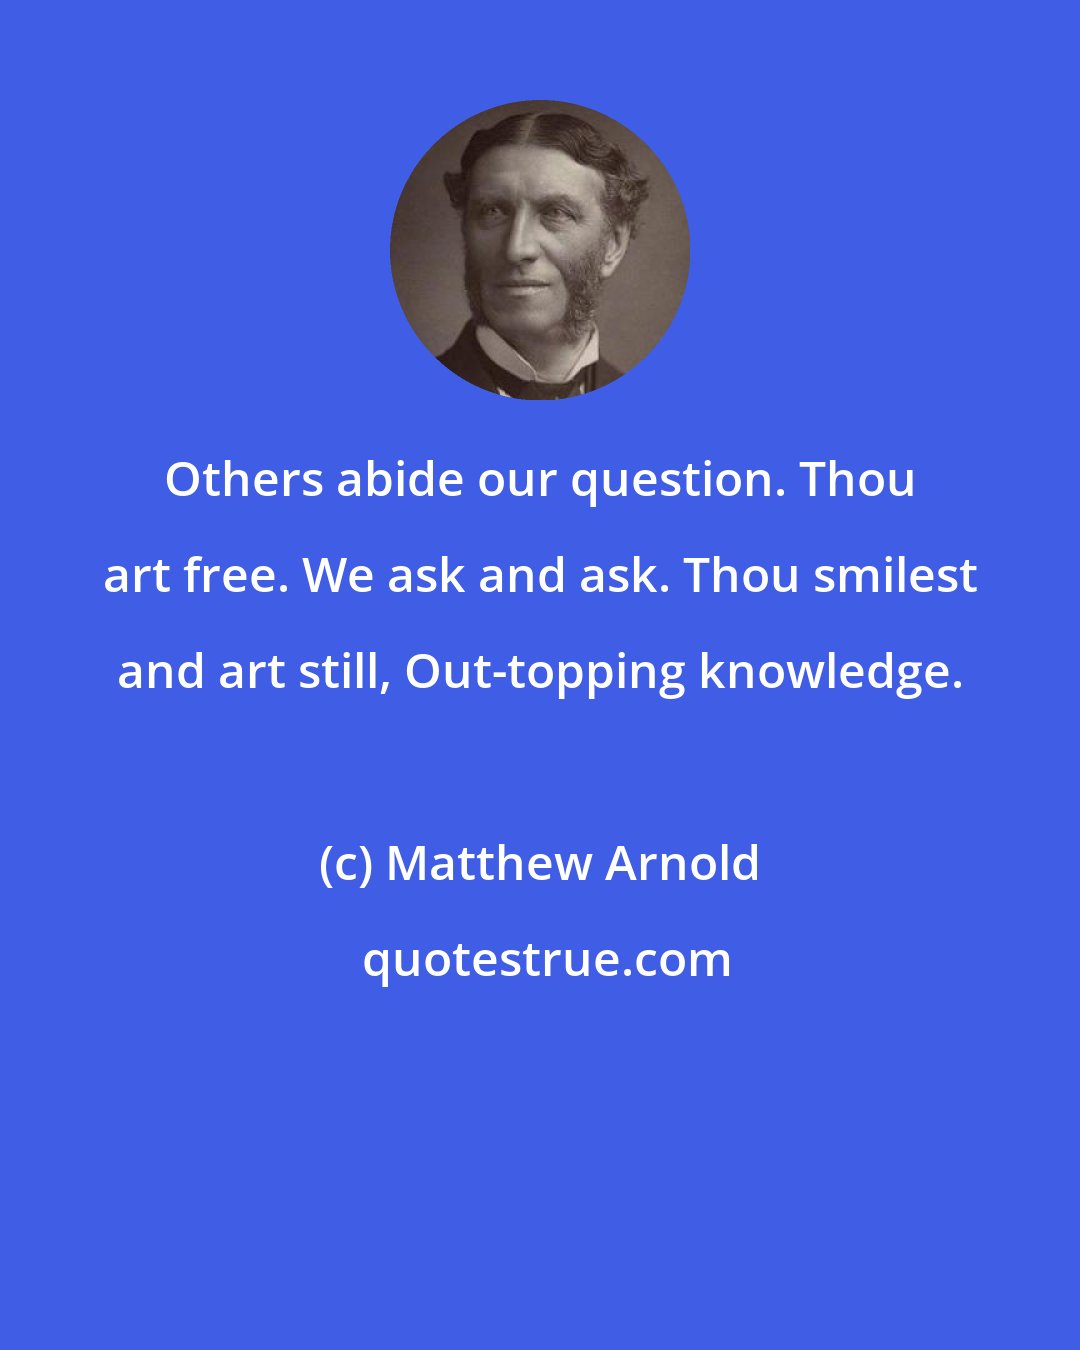 Matthew Arnold: Others abide our question. Thou art free. We ask and ask. Thou smilest and art still, Out-topping knowledge.